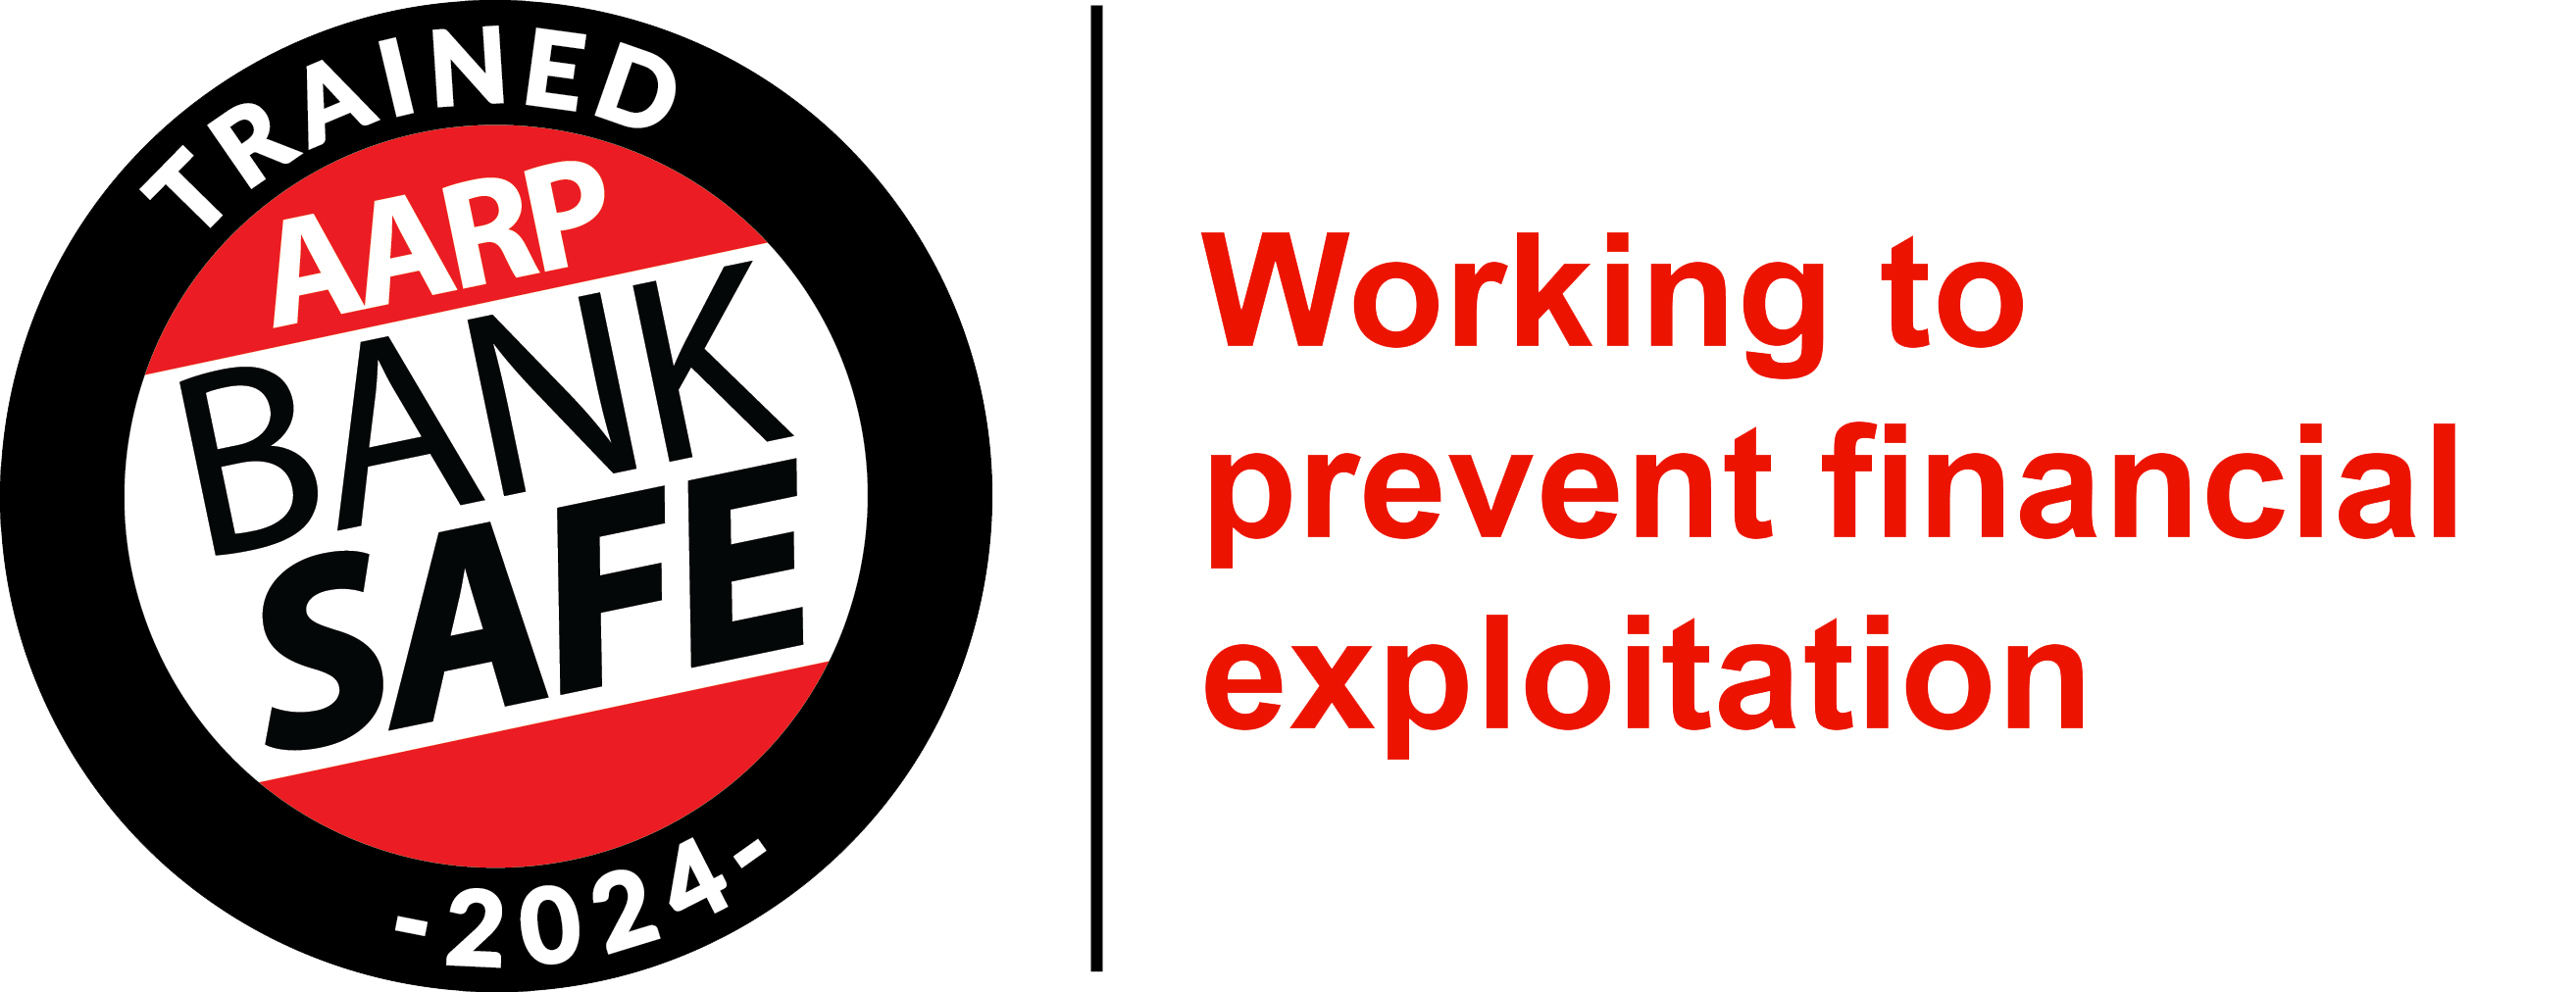 AARP Bank Safe Seal. Working to prevent financial exploitation.